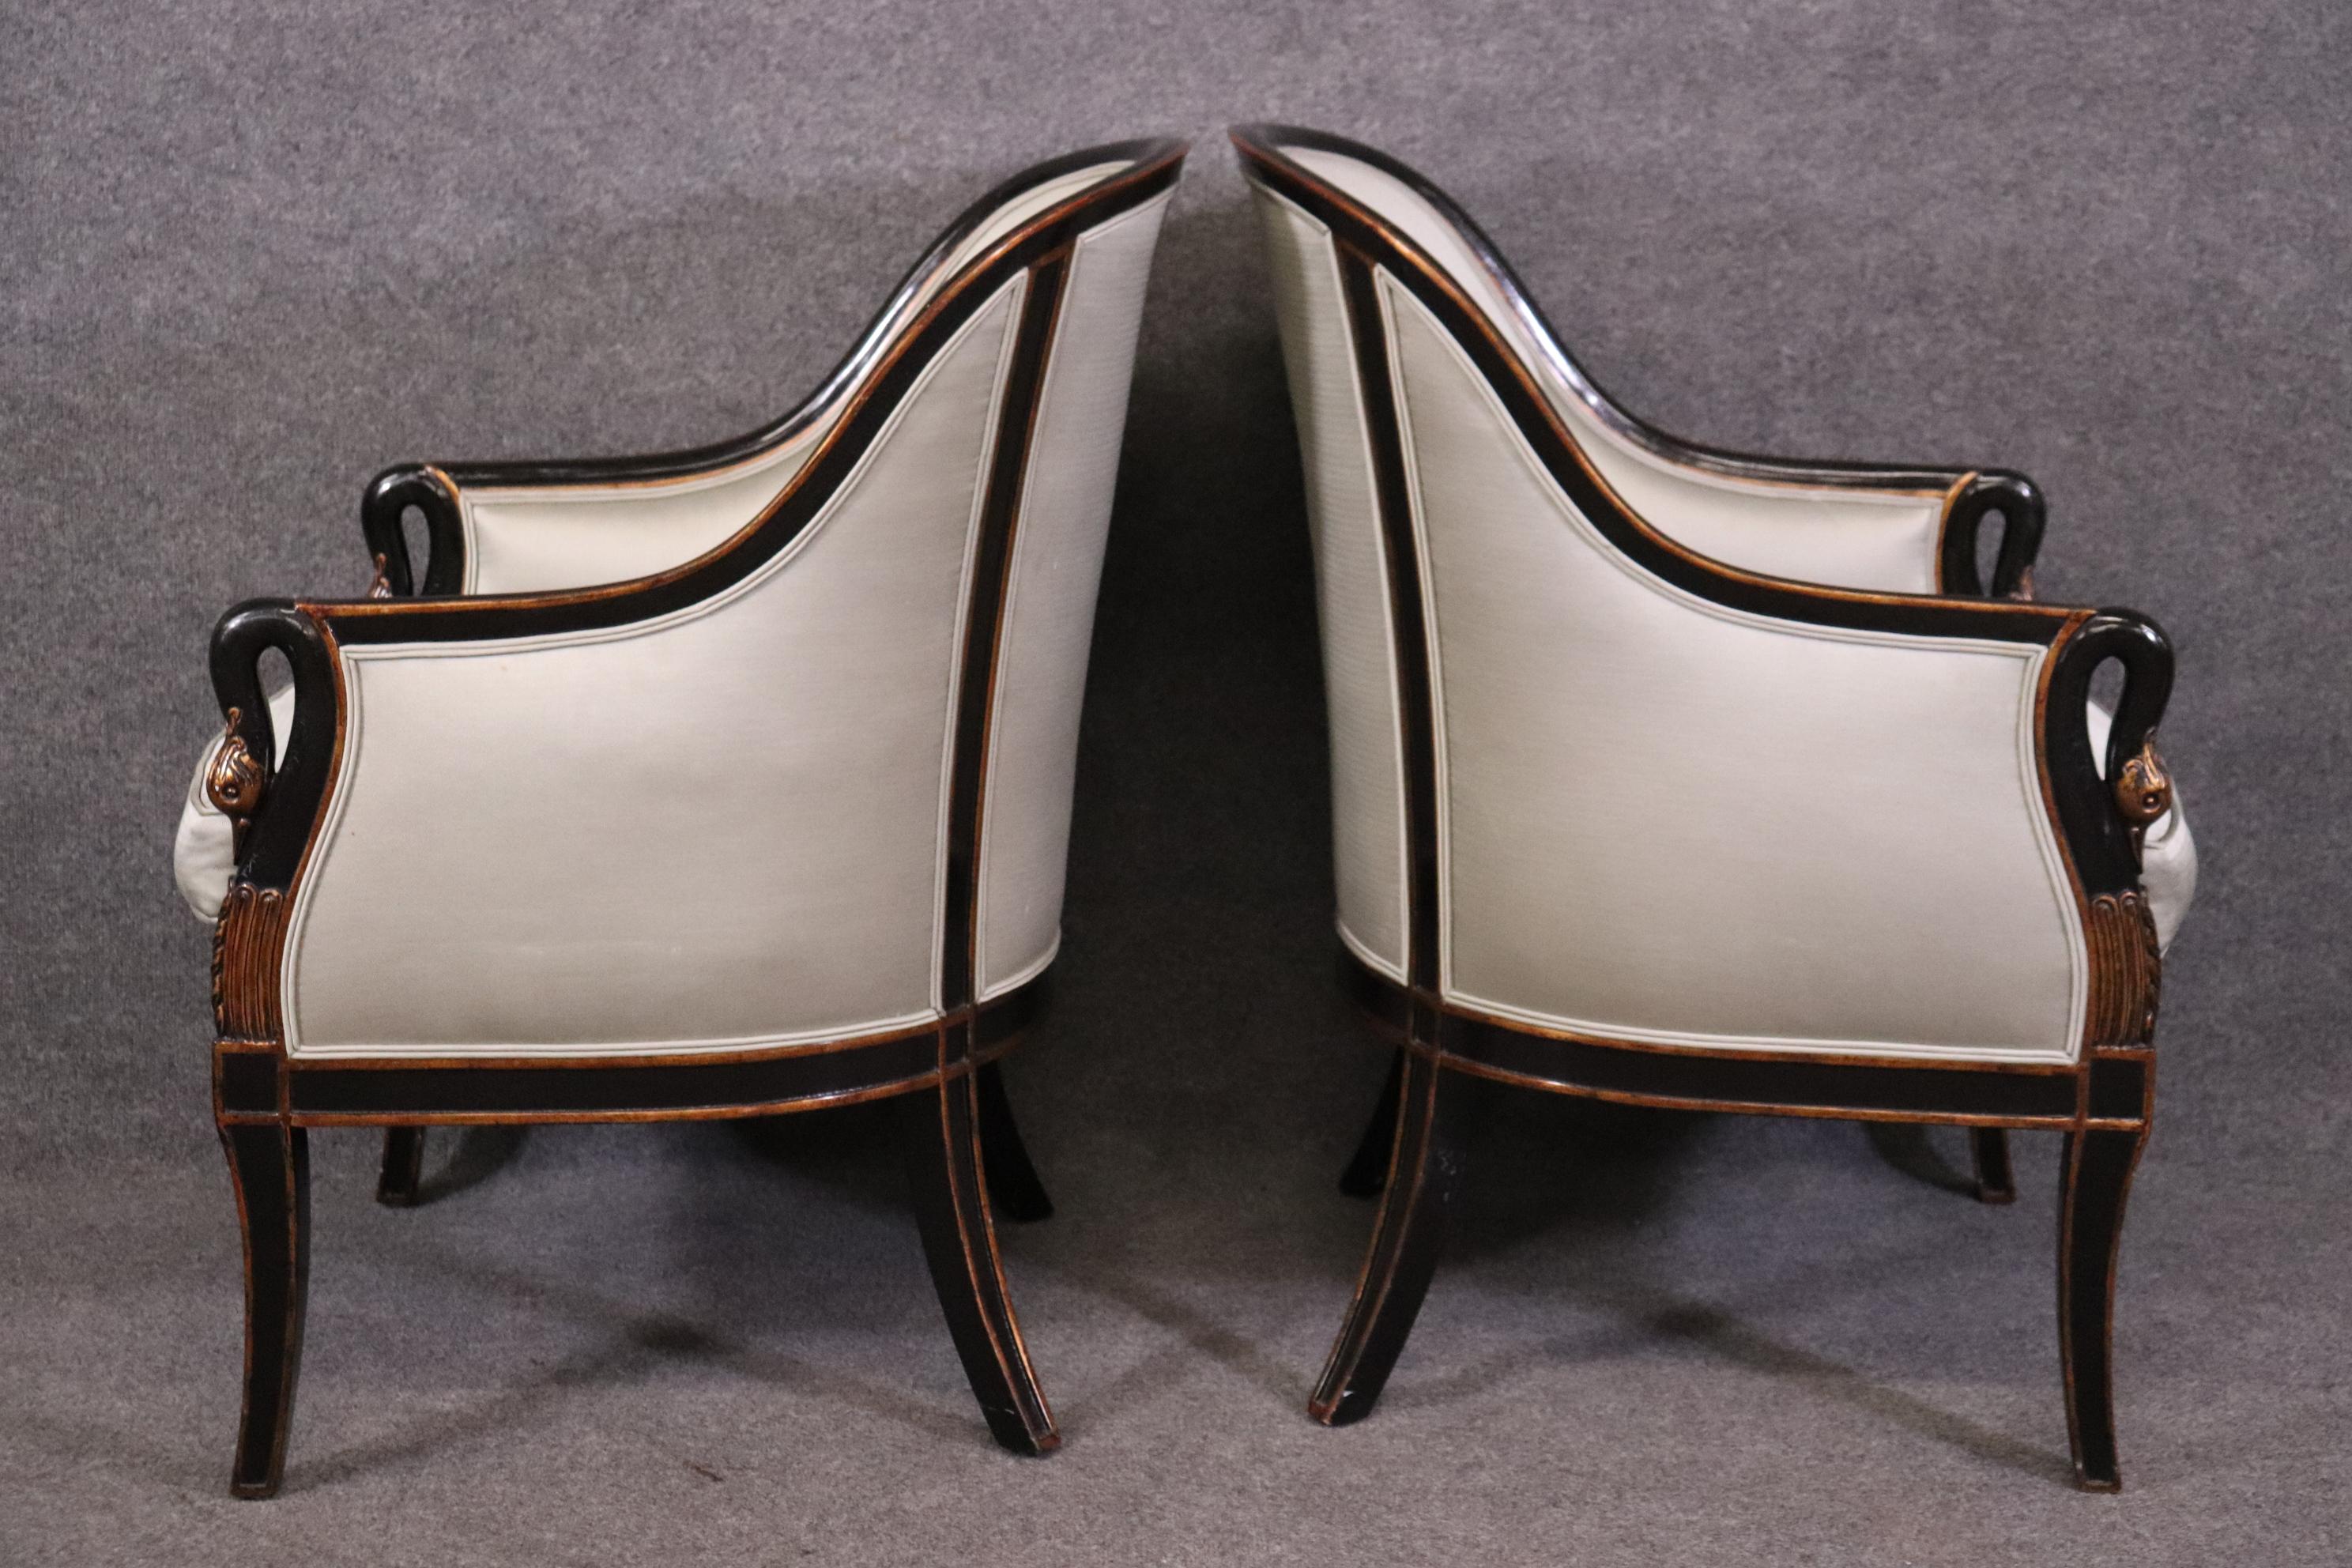 Dimensions- H: 38 1/2in W: 26in D: 30 1/4in SH: 21in 

This vintage pair of French Neoclassical style swan armchairs  bergeres lounge chairs is perfect for you and your home and is a lovely example of high quality furniture from the 20th century! If